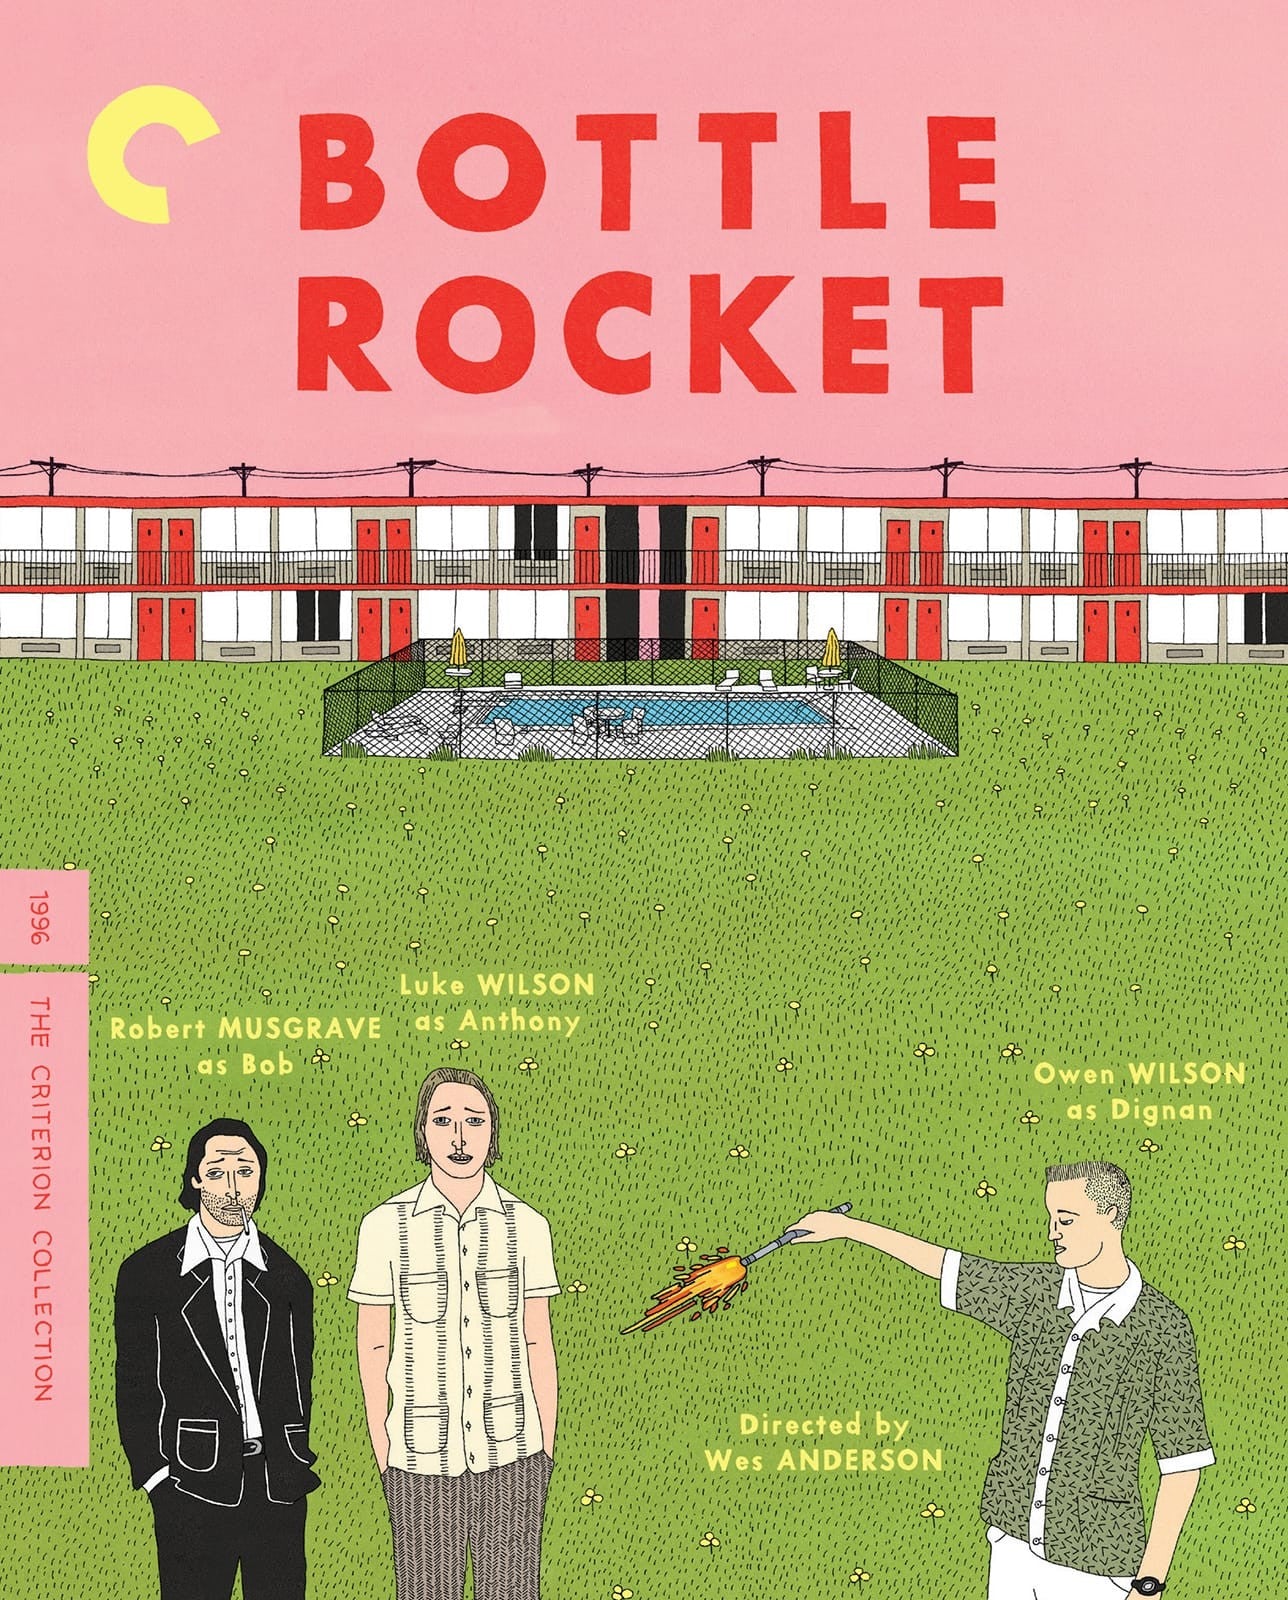 Bottle Rocket - Criterion Collection (Blu-ray)